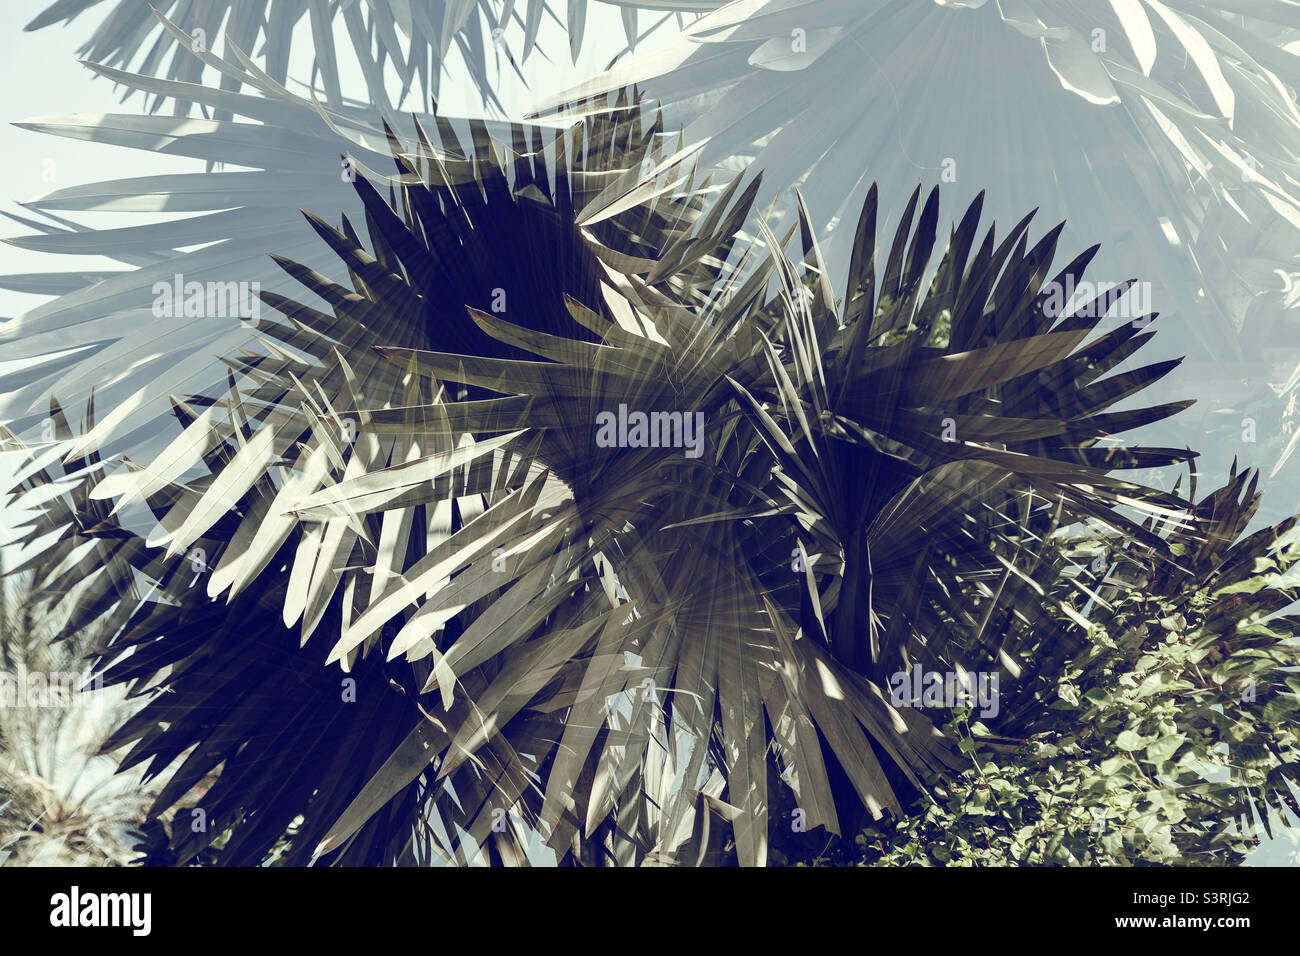 Double exposure of palm tree leaves, abstract creative background Stock Photo